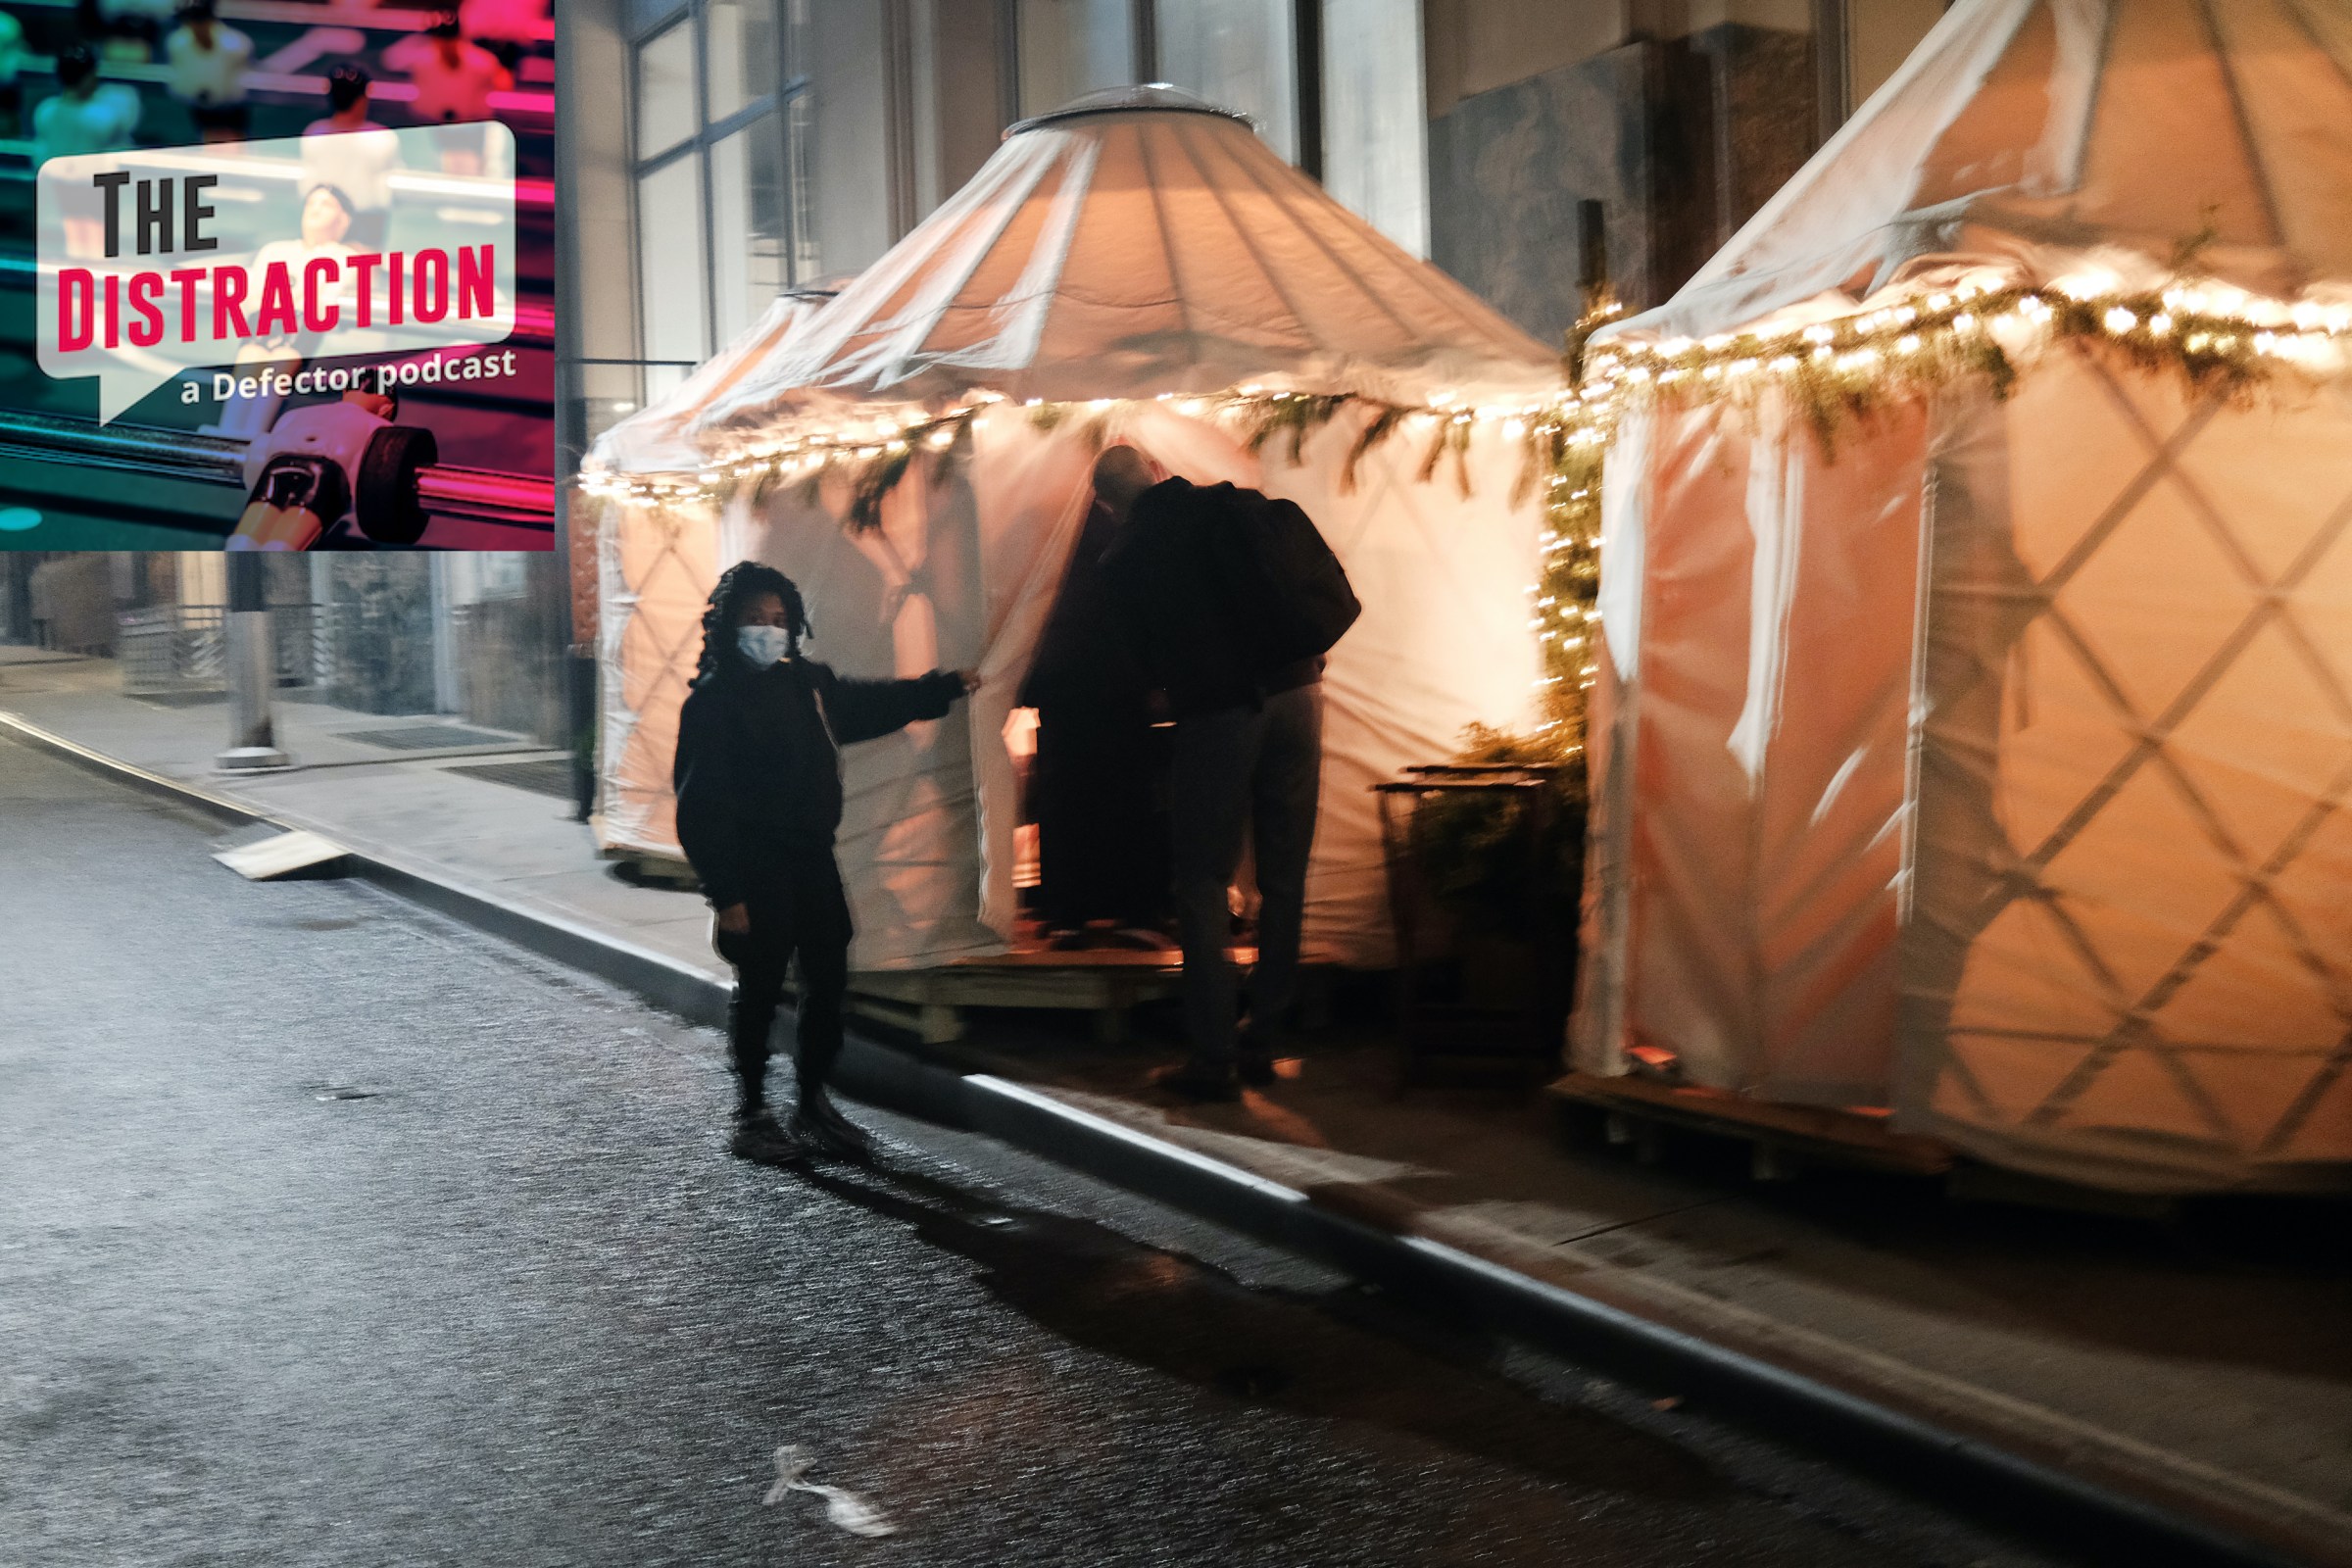 These strange yurts are now where people eat instead of inside restaurants.